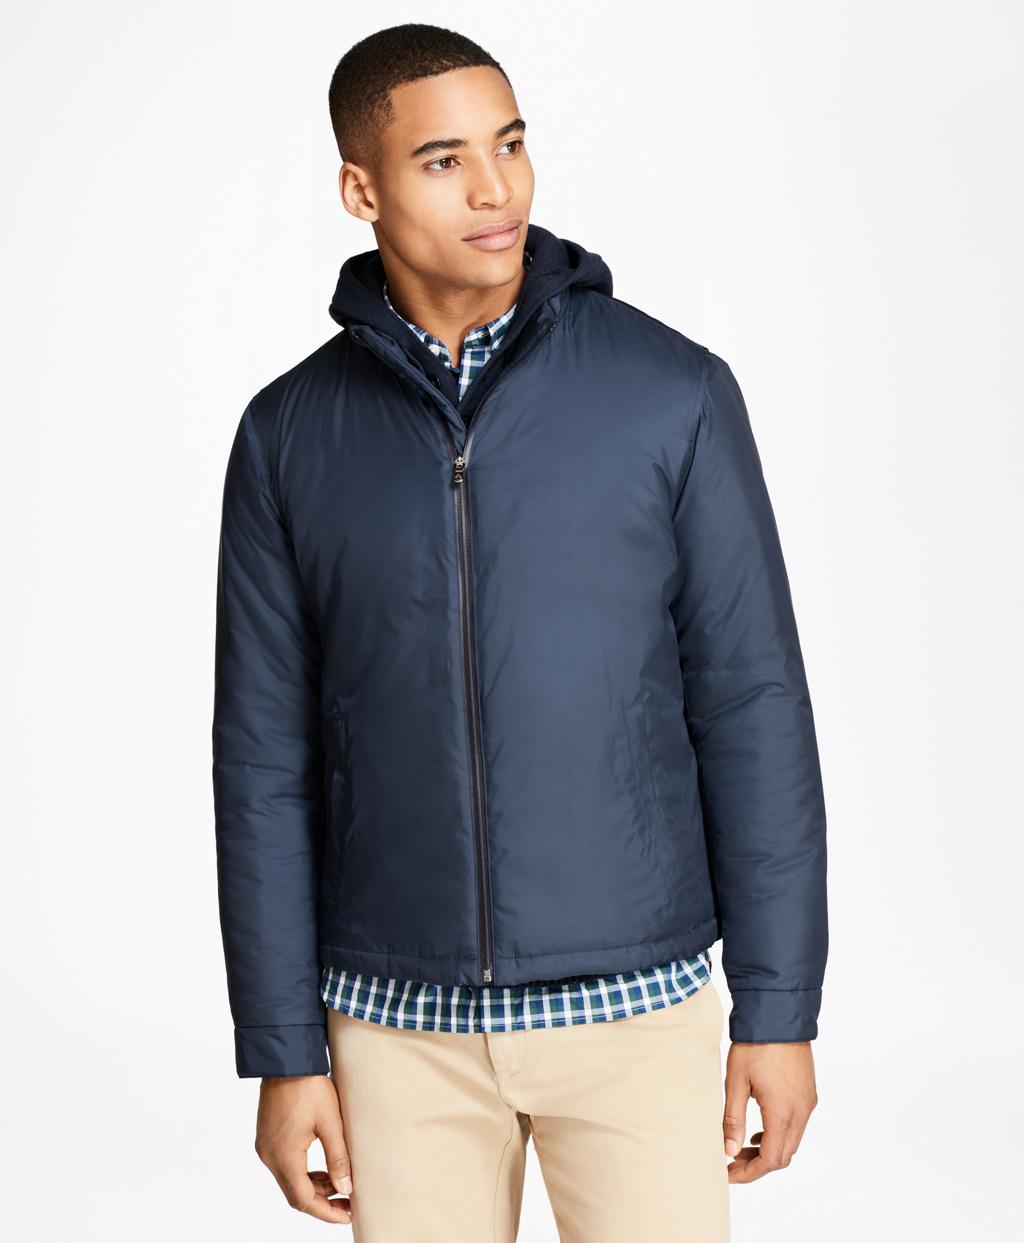 Lyst - Brooks Brothers Ecodown Bomber Jacket in Blue for Men